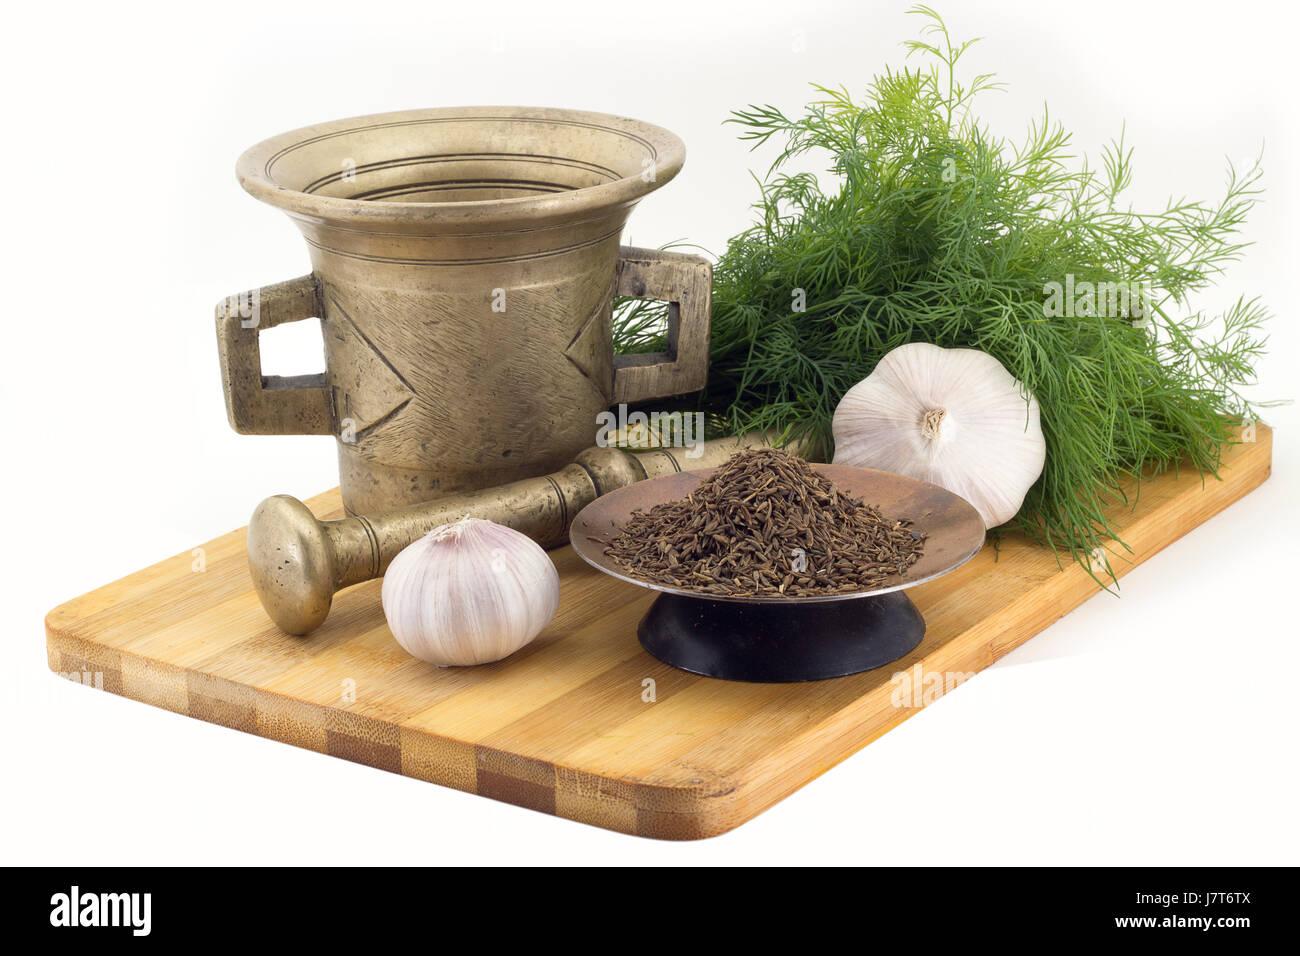 Still Life Spices, cumin ,marigold staminas in a copper vase on a wooden board on a background of a stern stupa for grinding spices, bunches of dill a Stock Photo